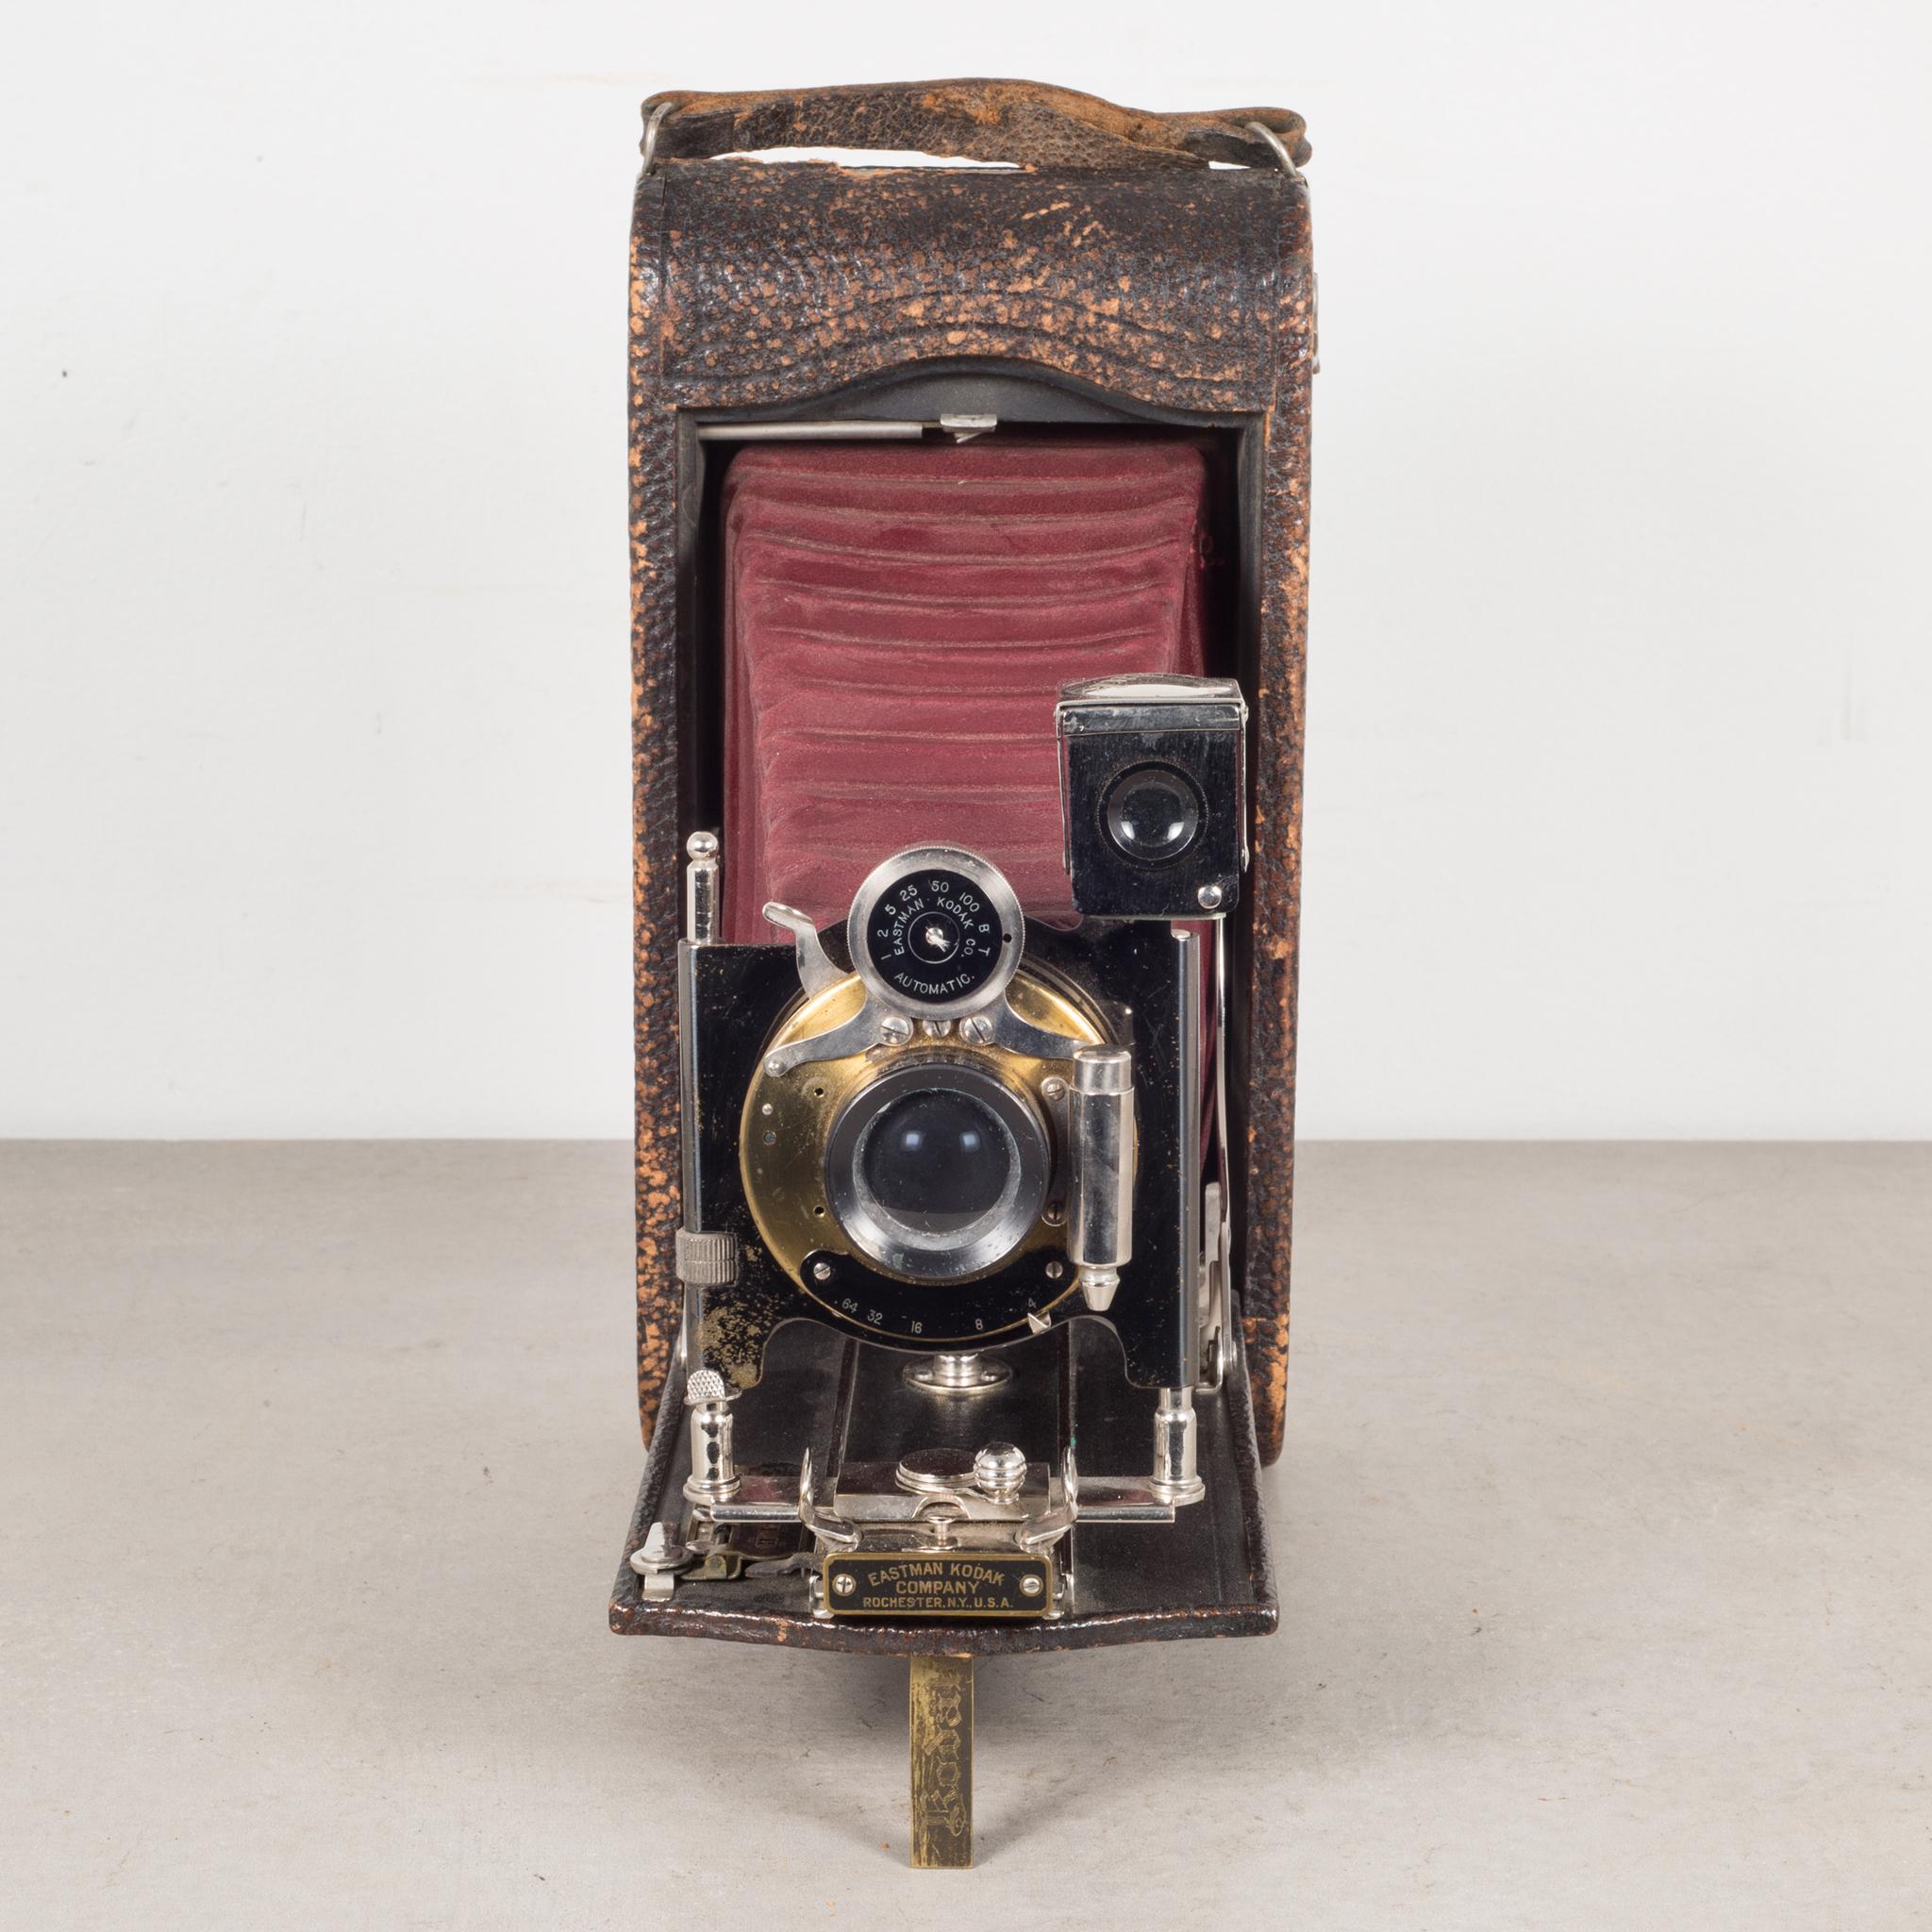 About

This is an original large Eastman Kodak No. 3A folding camera with red bellows. The body is wrapped in leather with chrome and brass accents. The camera folds to 2 inches. This piece has retained its original finish with minor structurally